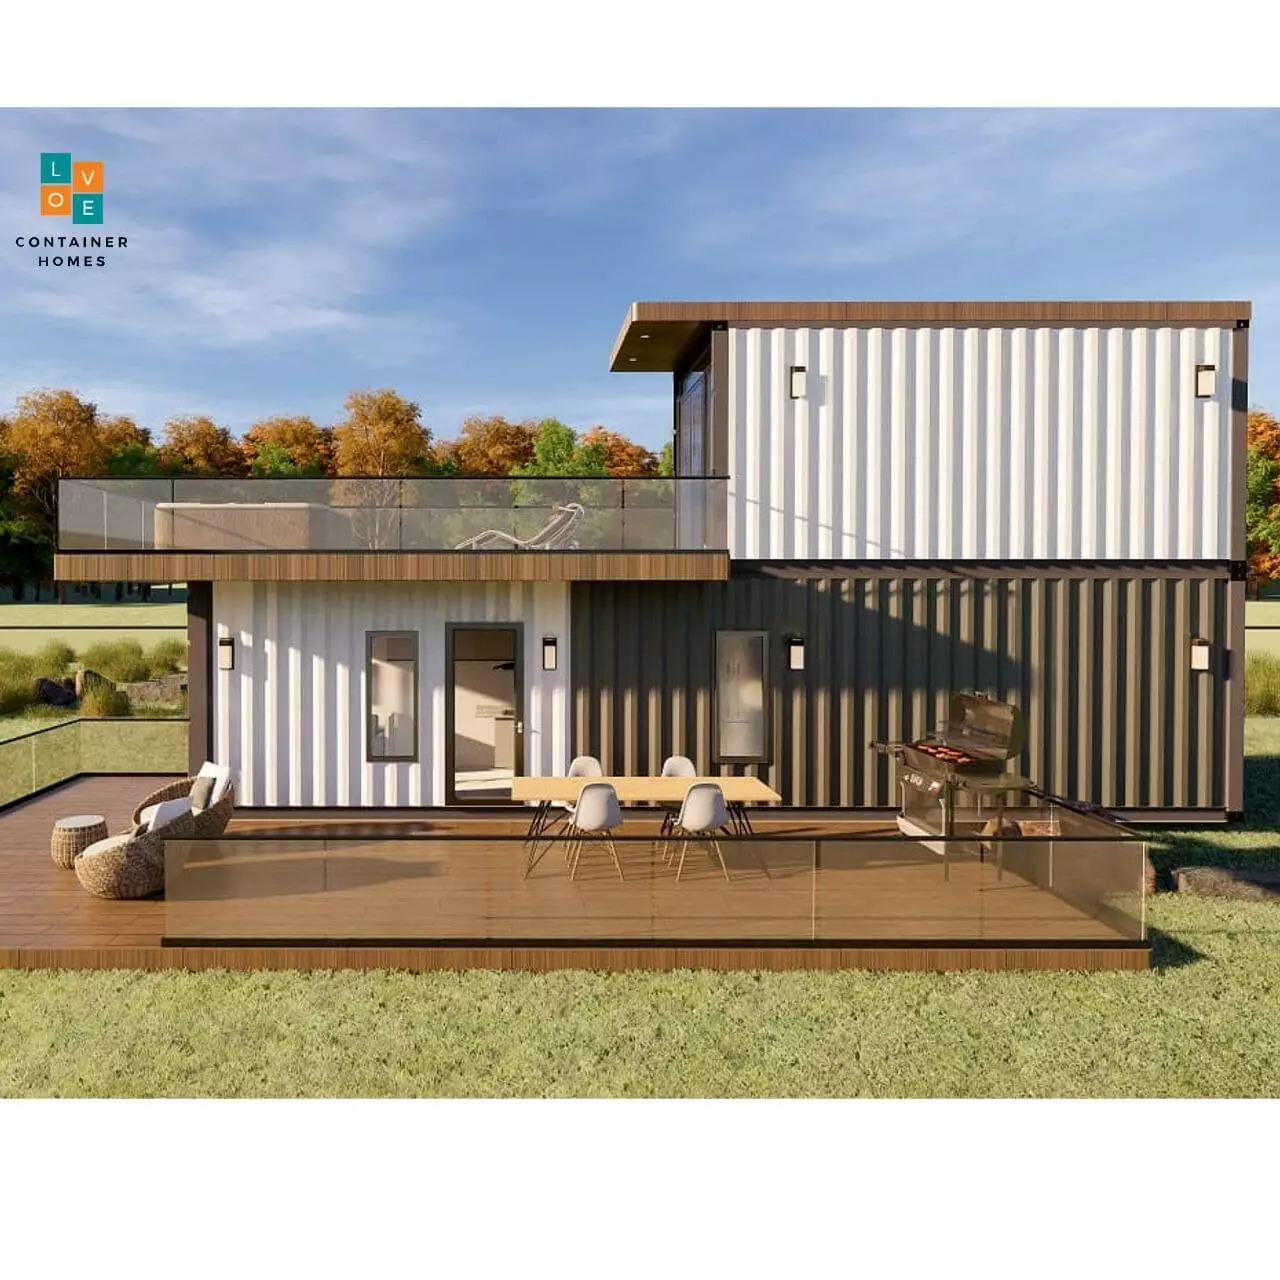 Modern Shipping Container House Design: A Cozy 2-Bedroom